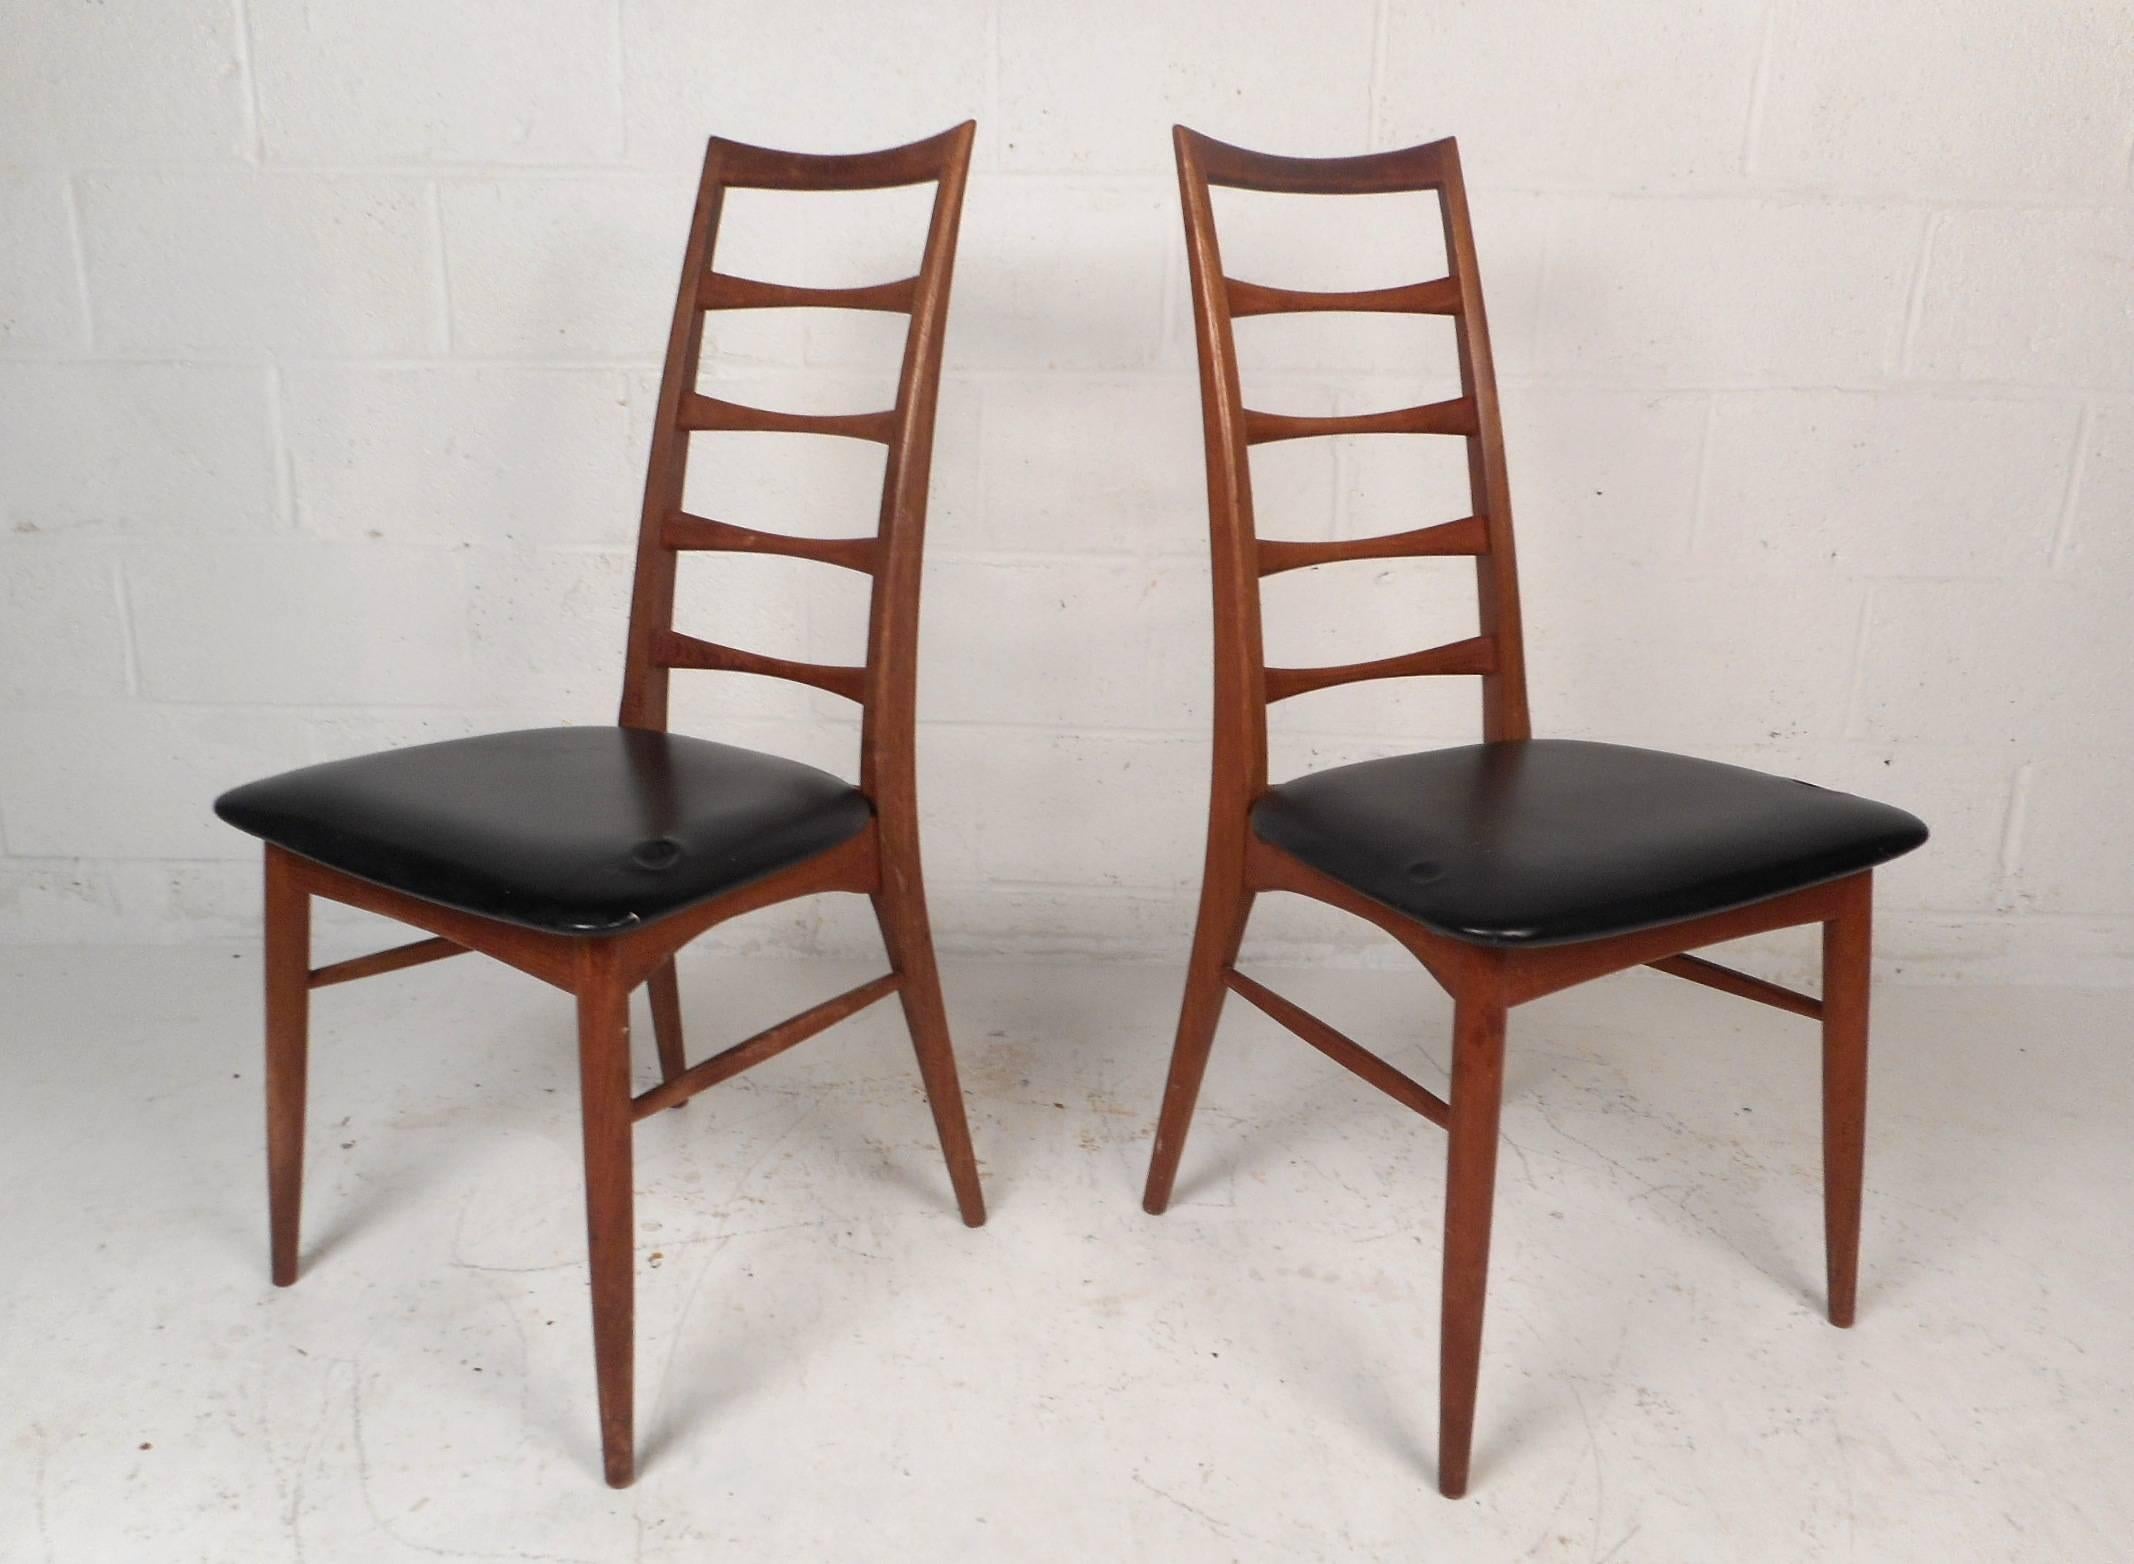 This gorgeous vintage modern pair of side chairs feature a sculpted teak frame and black vinyl upholstery. The sleek ladder backrest and angled back legs add to the midcentury appeal. Quality craftsmanship with stunning teak wood grain ensures